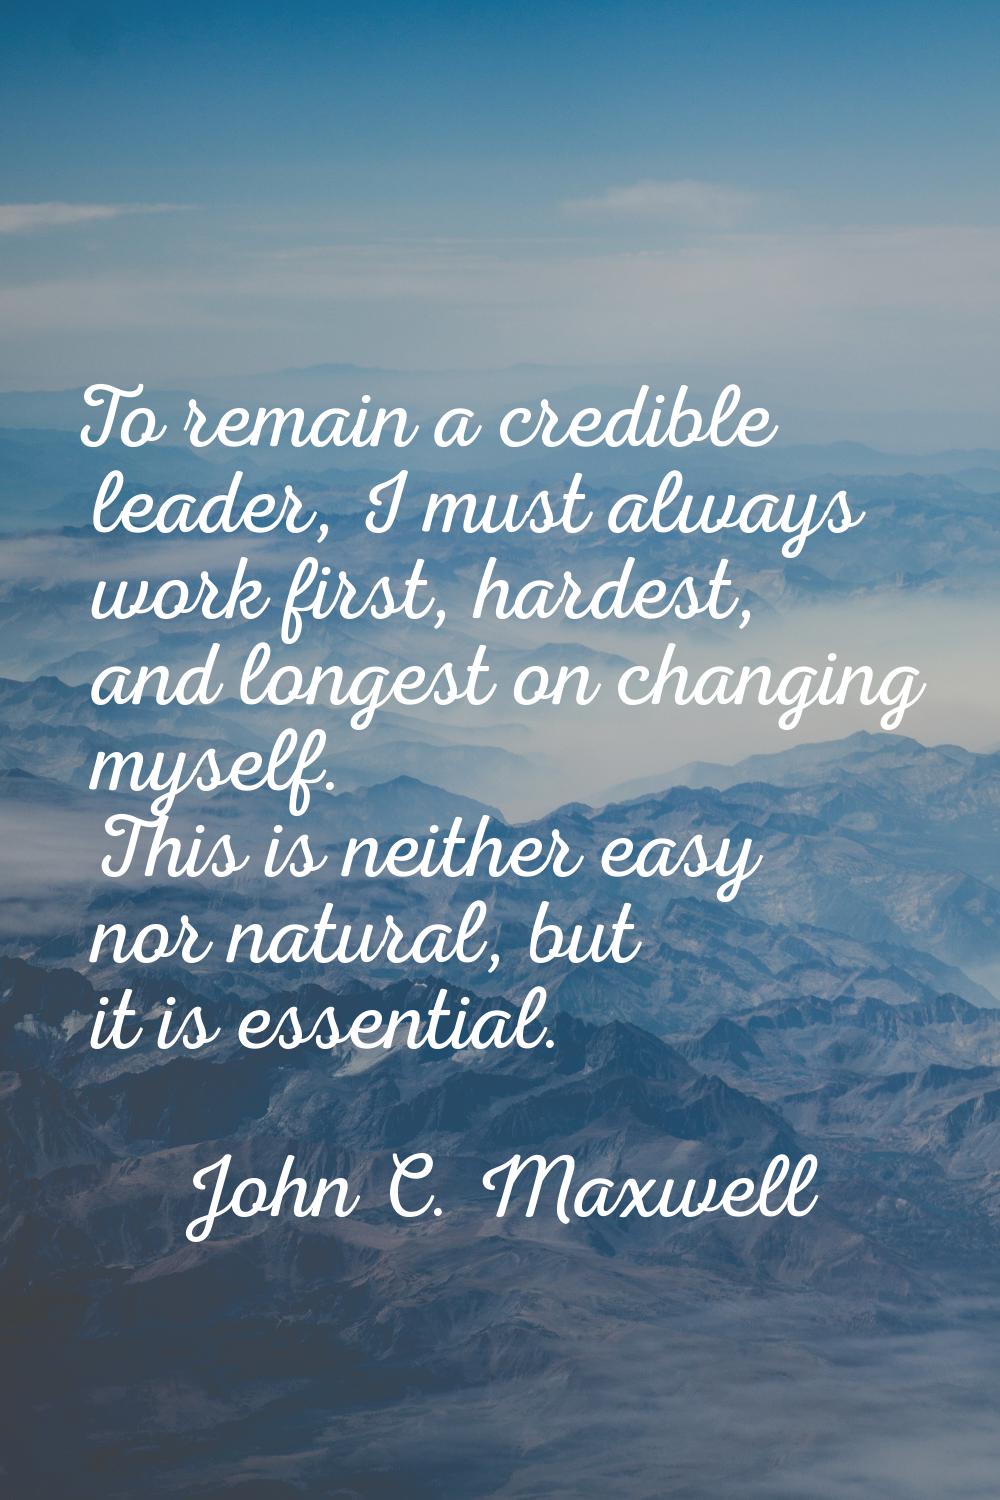 To remain a credible leader, I must always work first, hardest, and longest on changing myself. Thi